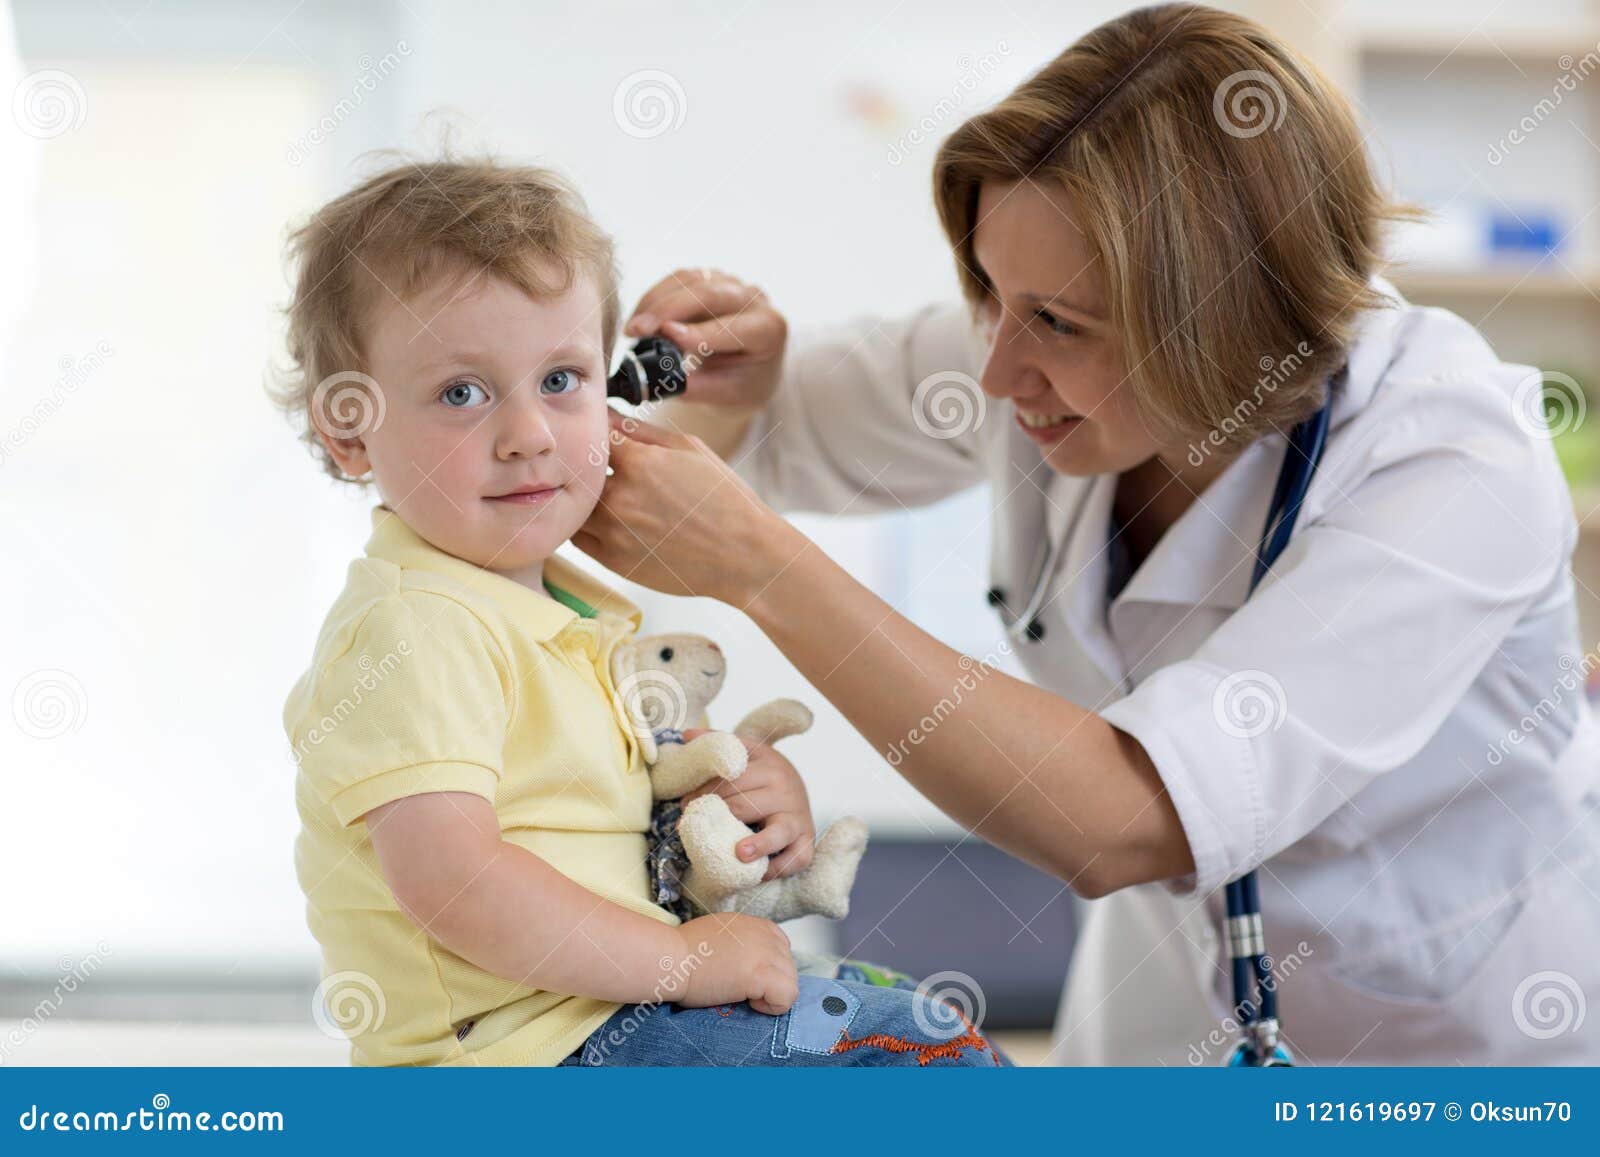 doctor examines ear with otoscope in a pediatrician room. medical equipment